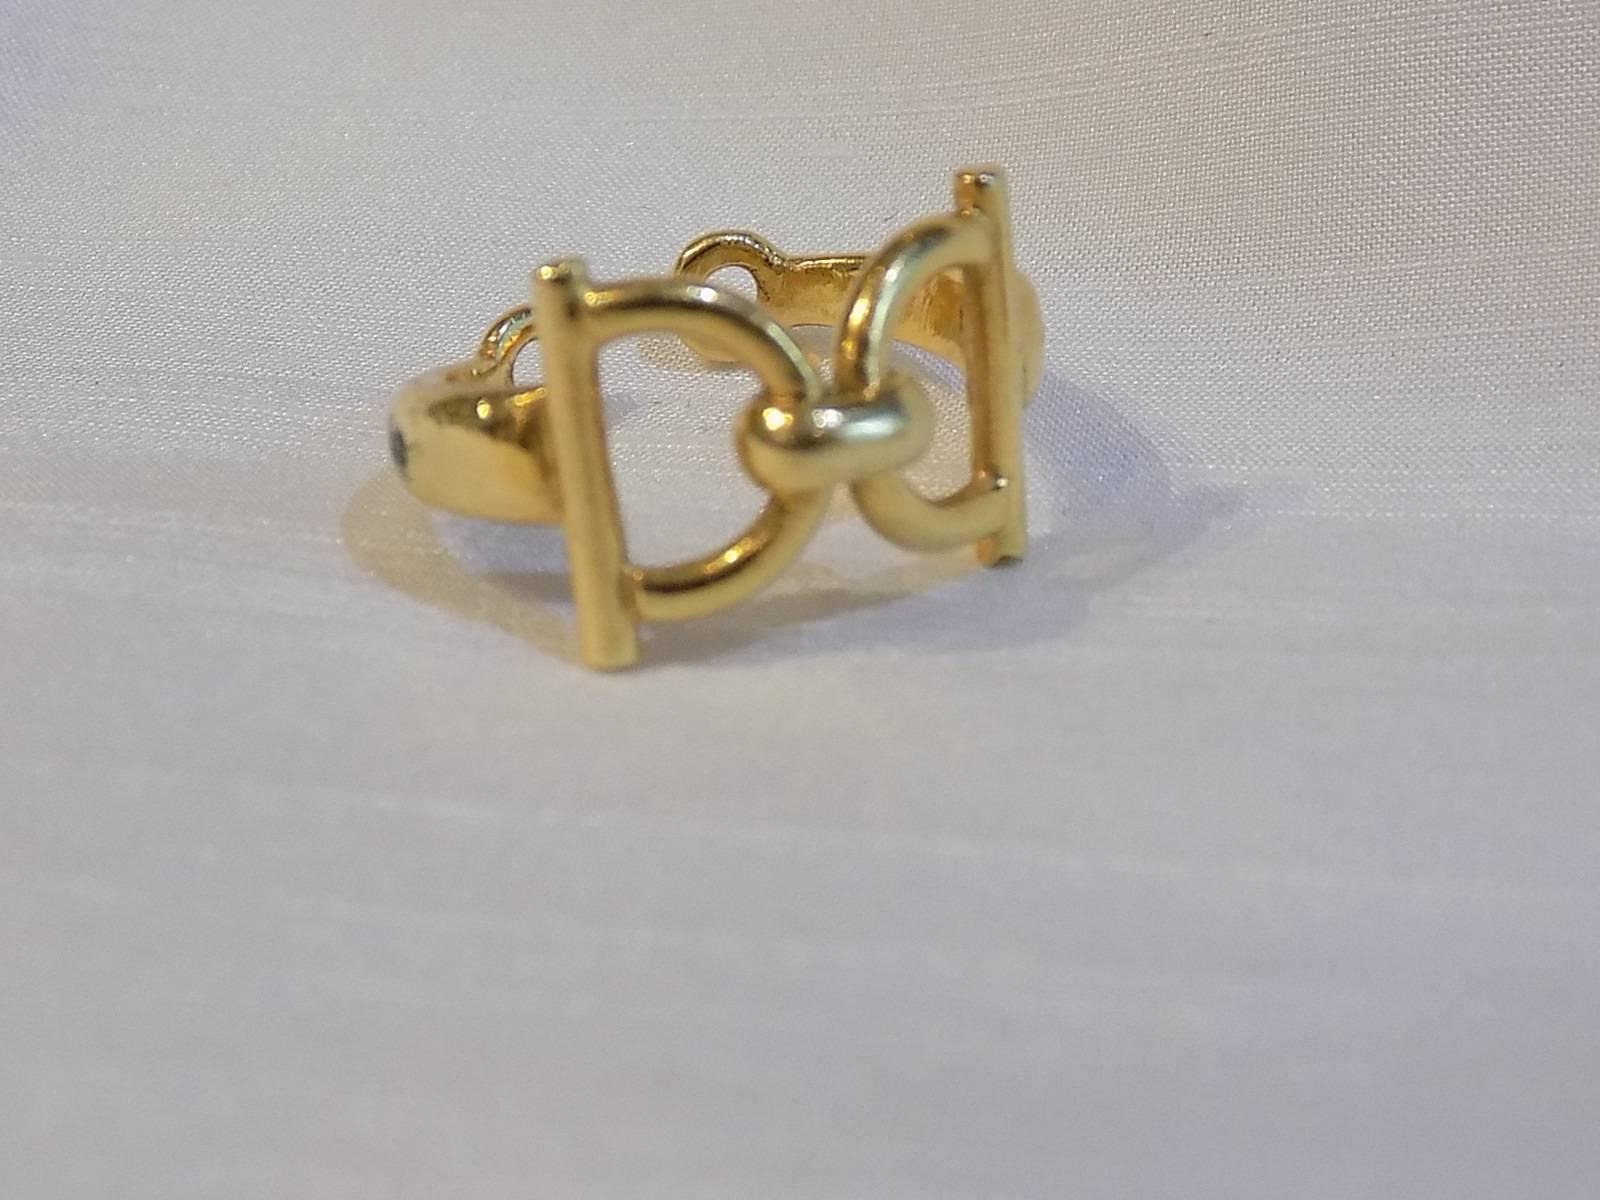  Vintage Gucci Horsebit Gold Open Ring   For Sale 2